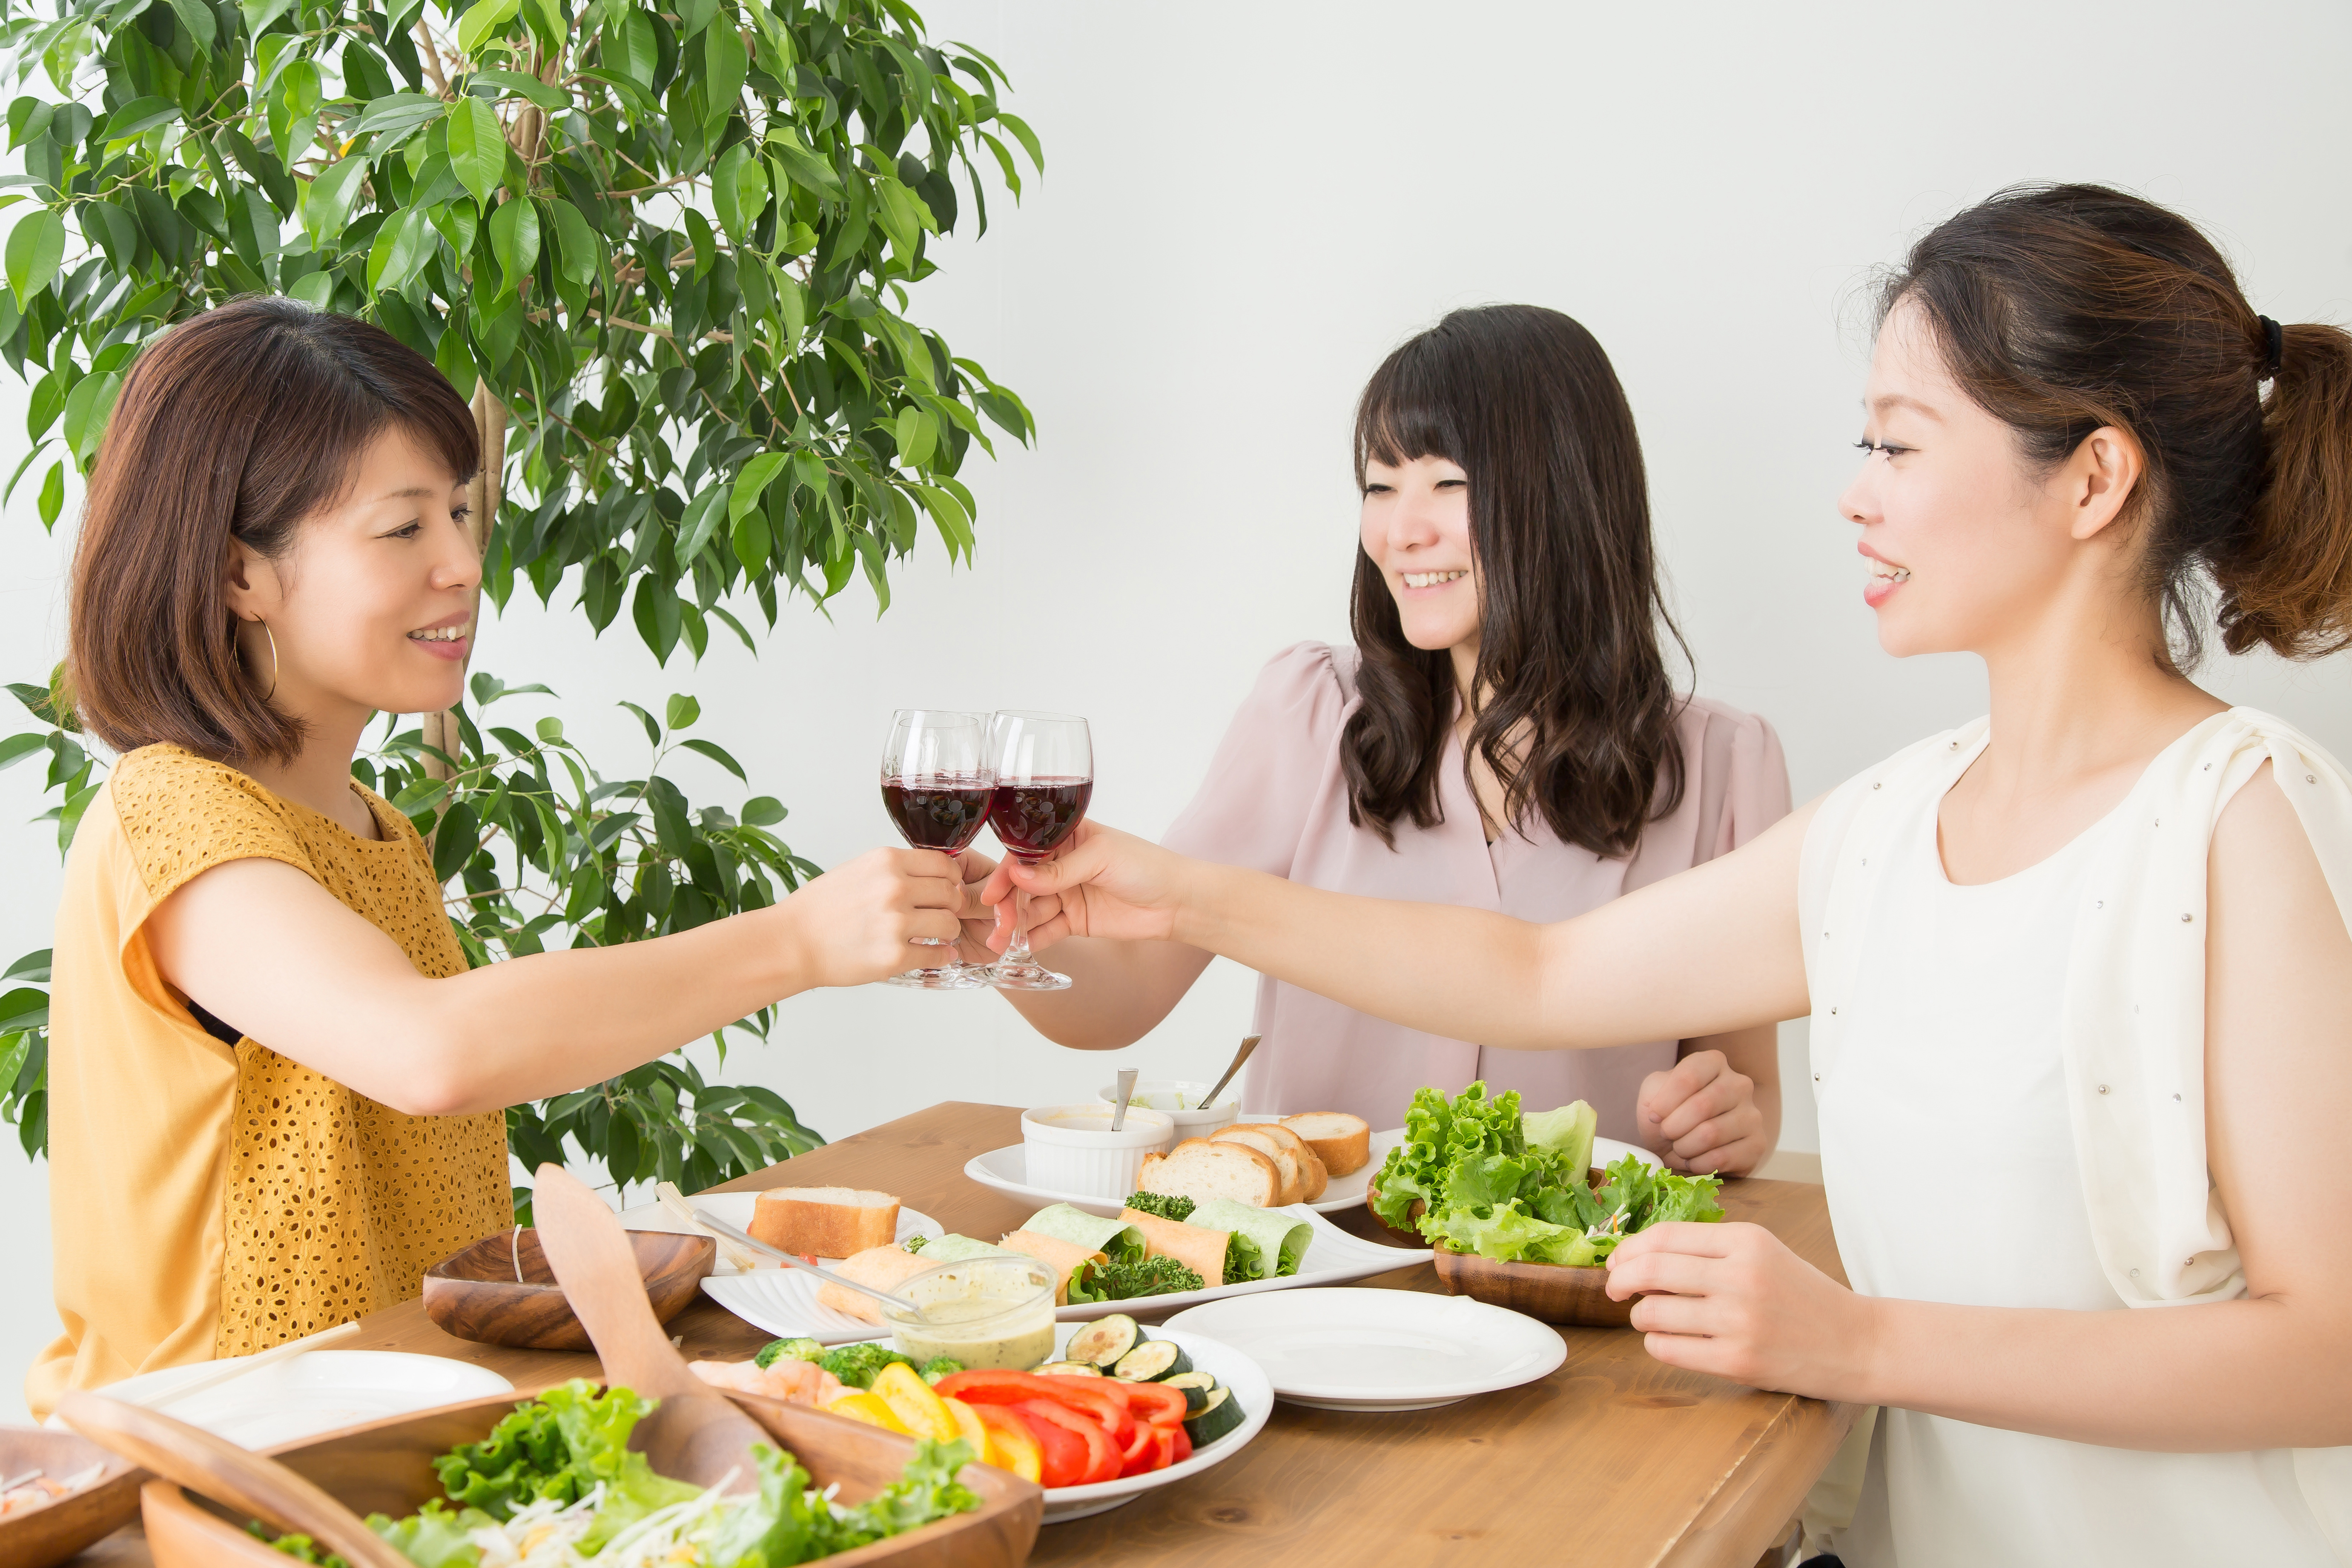 A trio of mothers from Asian descent cheers with red wine glasses paired with a spread of salads, sandwiches, and fresh vegetables